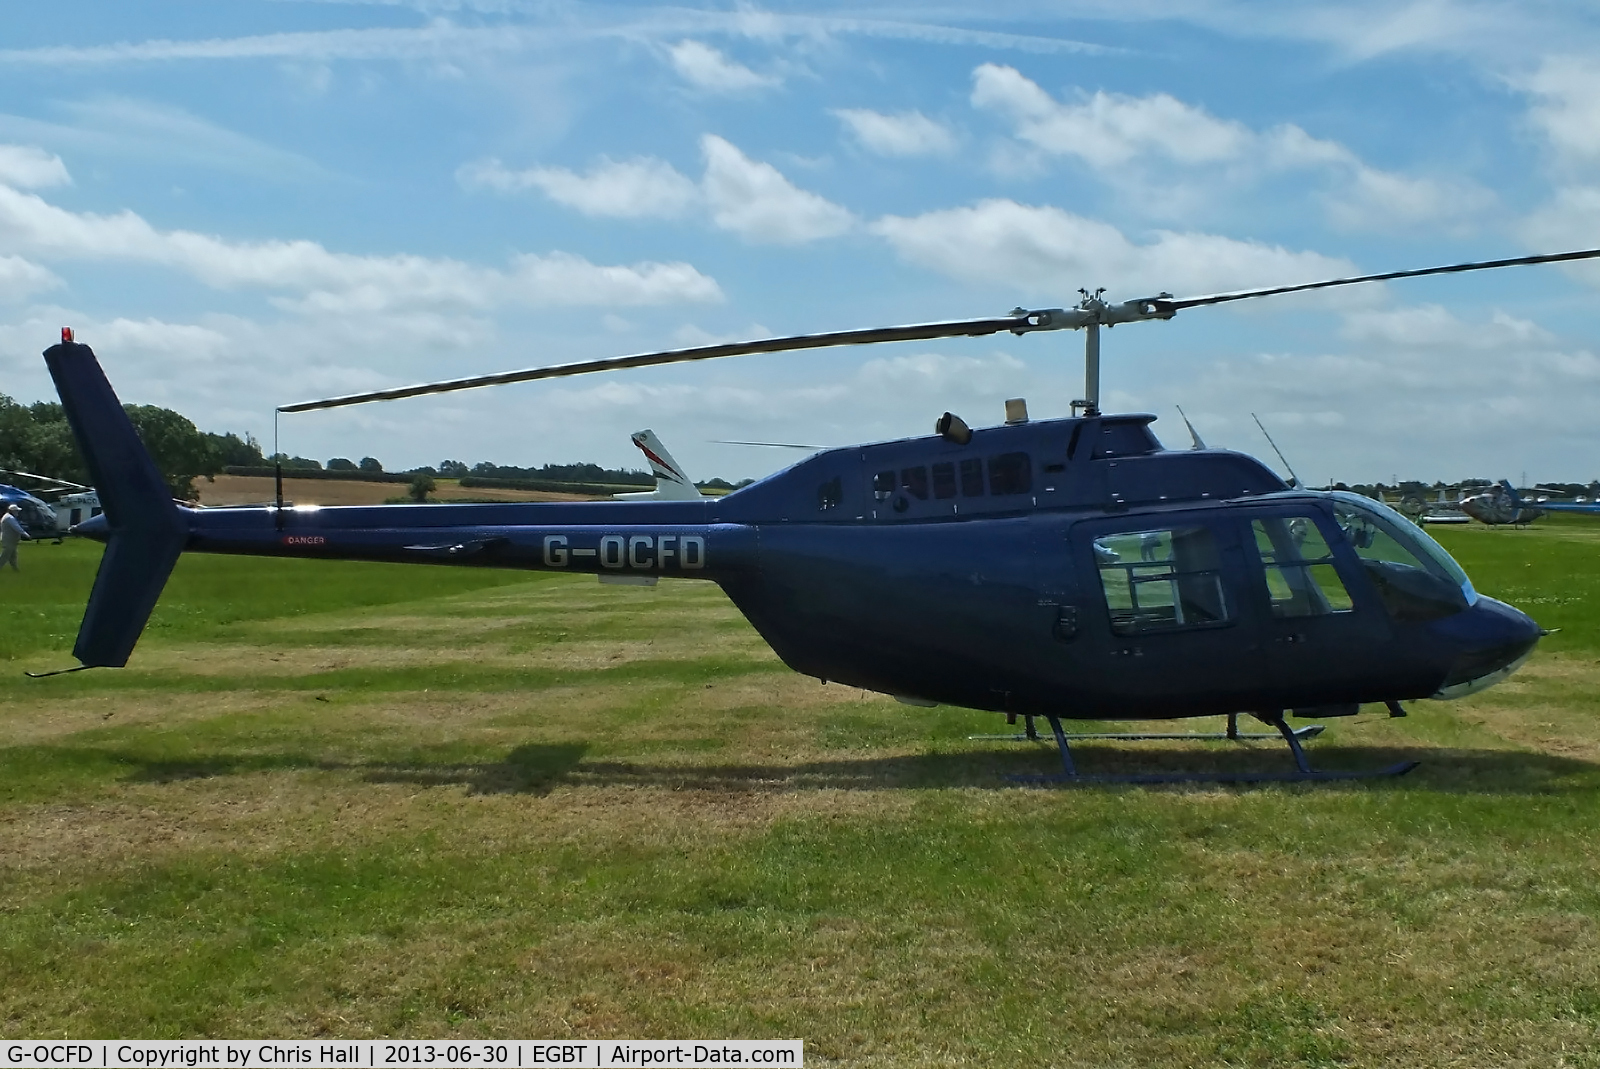 G-OCFD, 1980 Bell 206B JetRanger III C/N 3165, being used for ferrying race fans to the British F1 Grand Prix at Silverstone